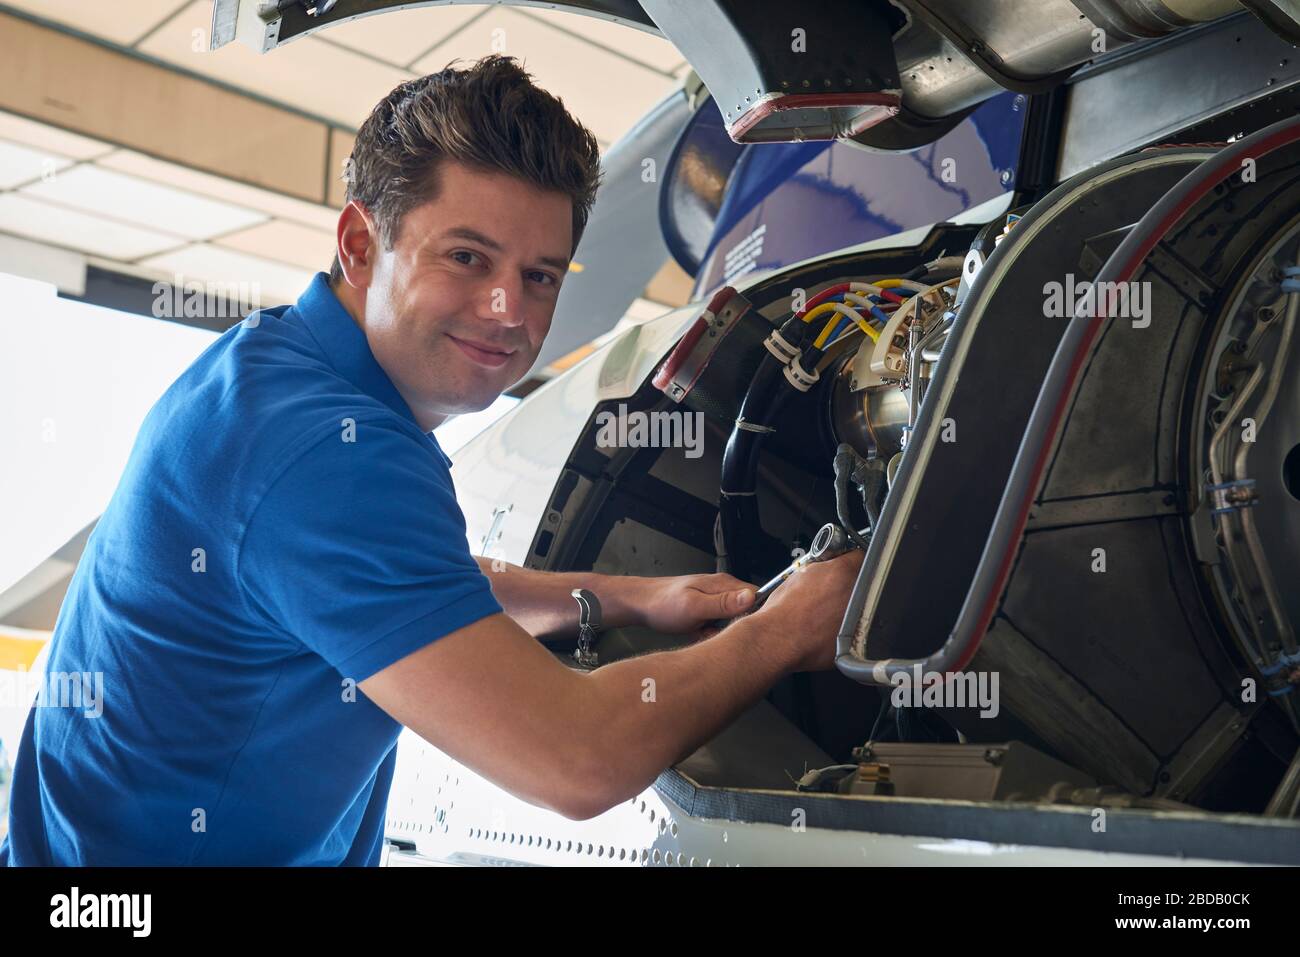 Portrait Of Male Aero Engineer Working On Helicopter In Hangar Stock Photo